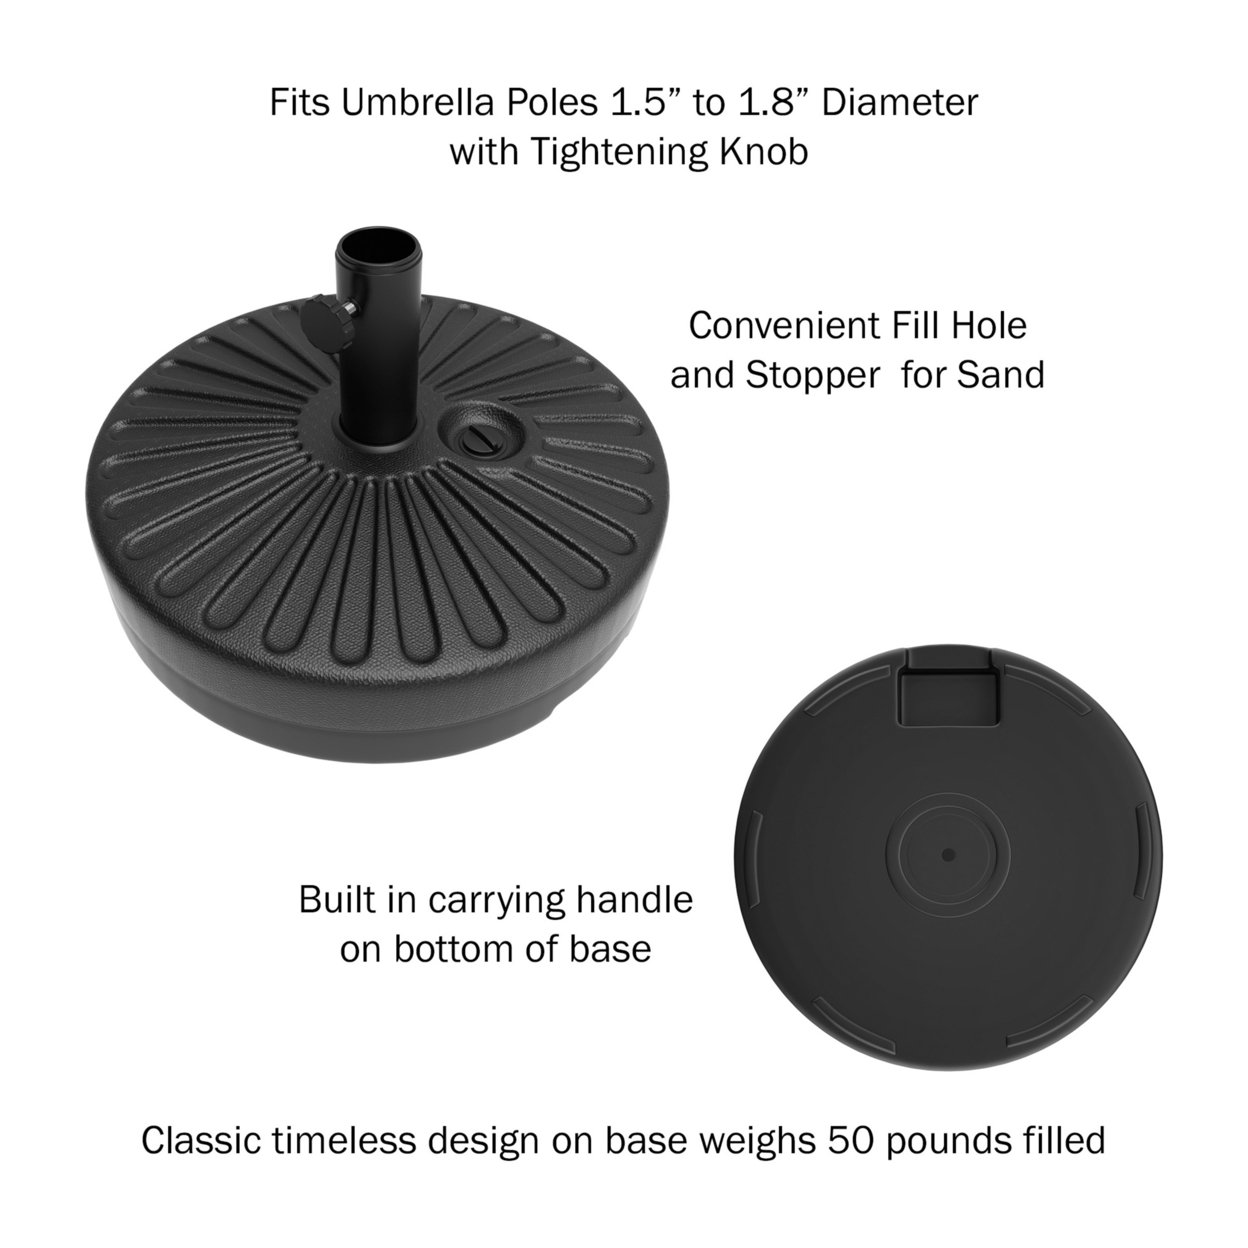 Patio Umbrella Base Weighted Round Umbrella Holder- Fill With Sand - For Use Outdoors On Decks, Balconies Or Poolside